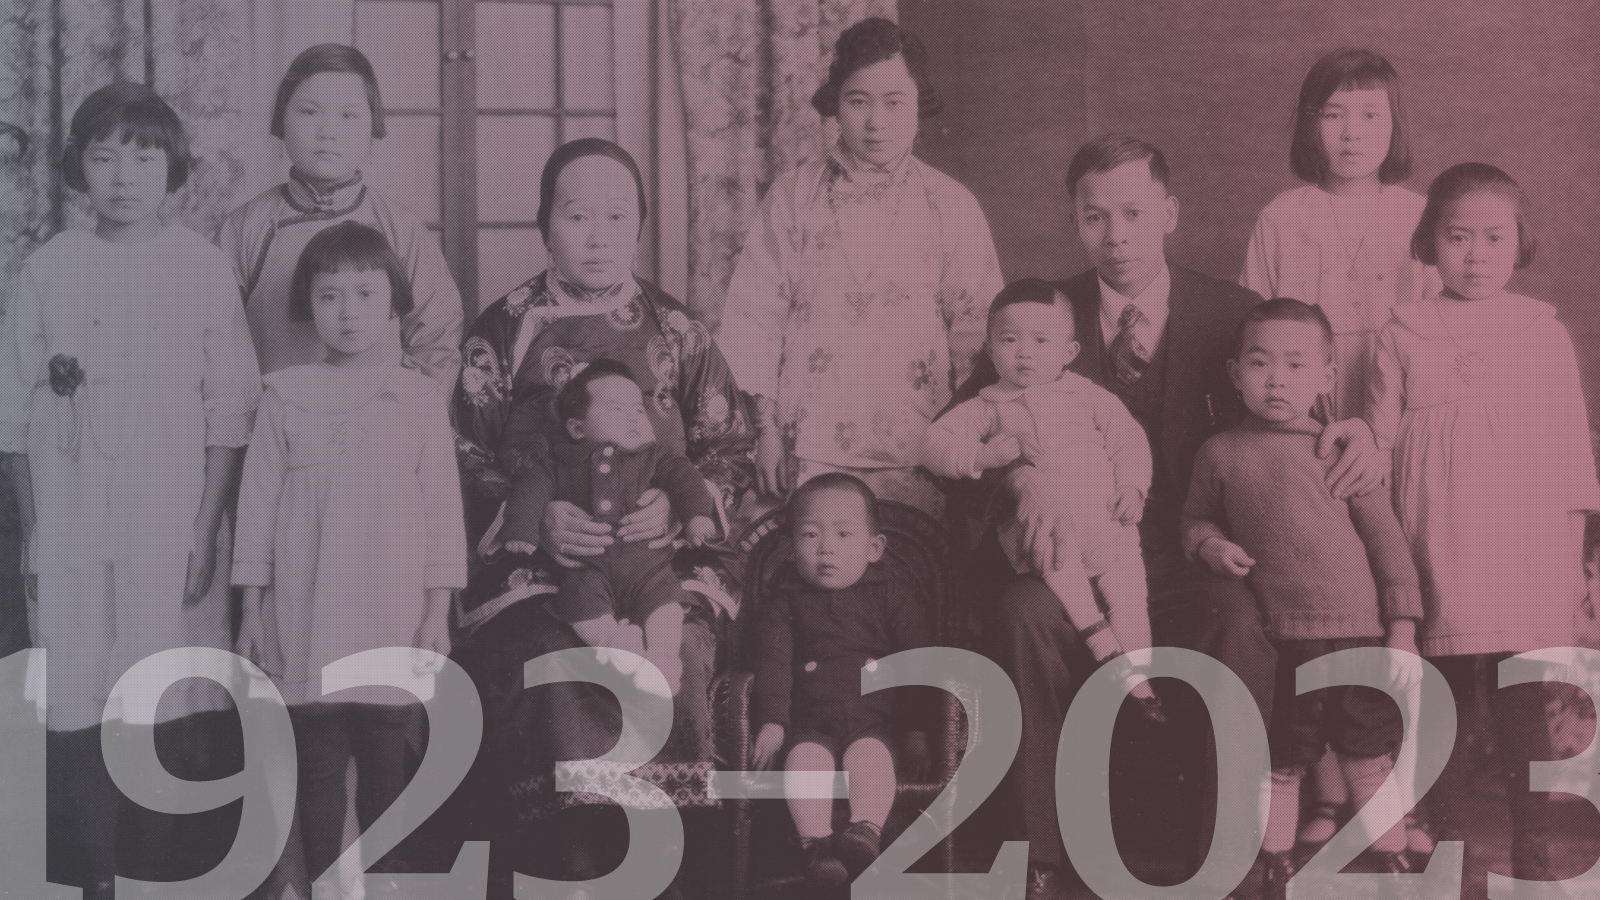 Archival image of a Chinese family with "1923-2023" text layered on top.